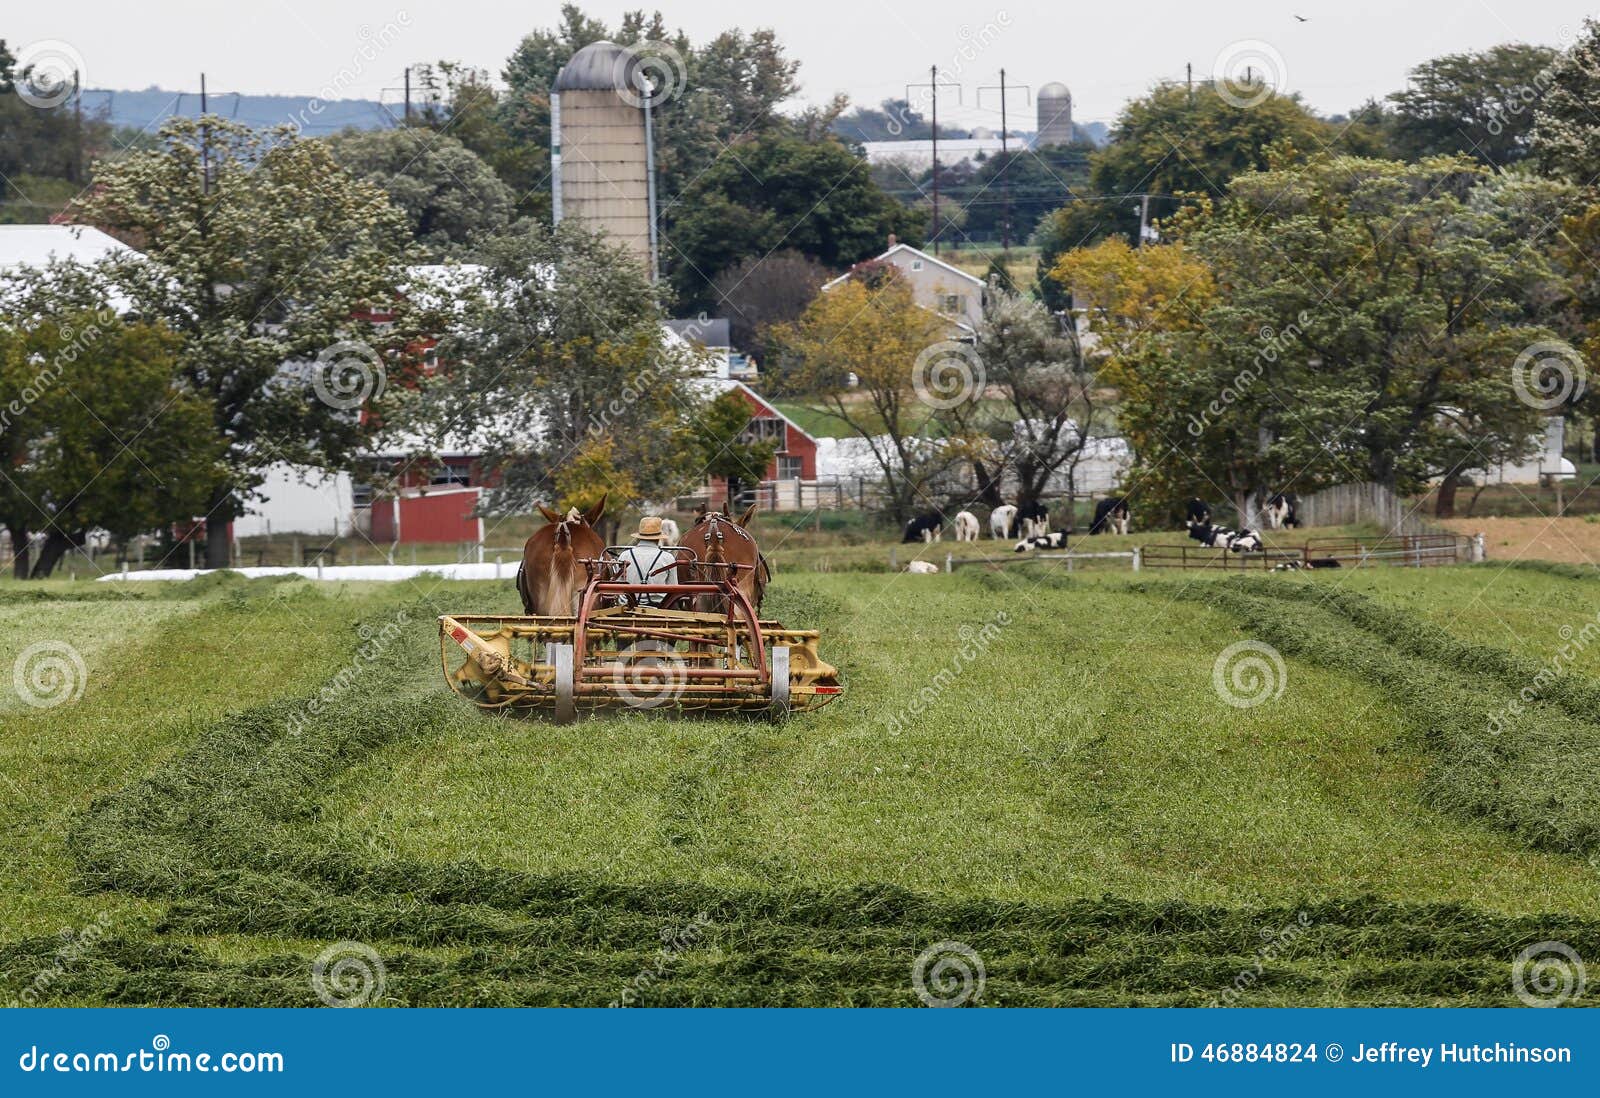 Amish farmer stock photo. Image of countryside, fields - 46884824